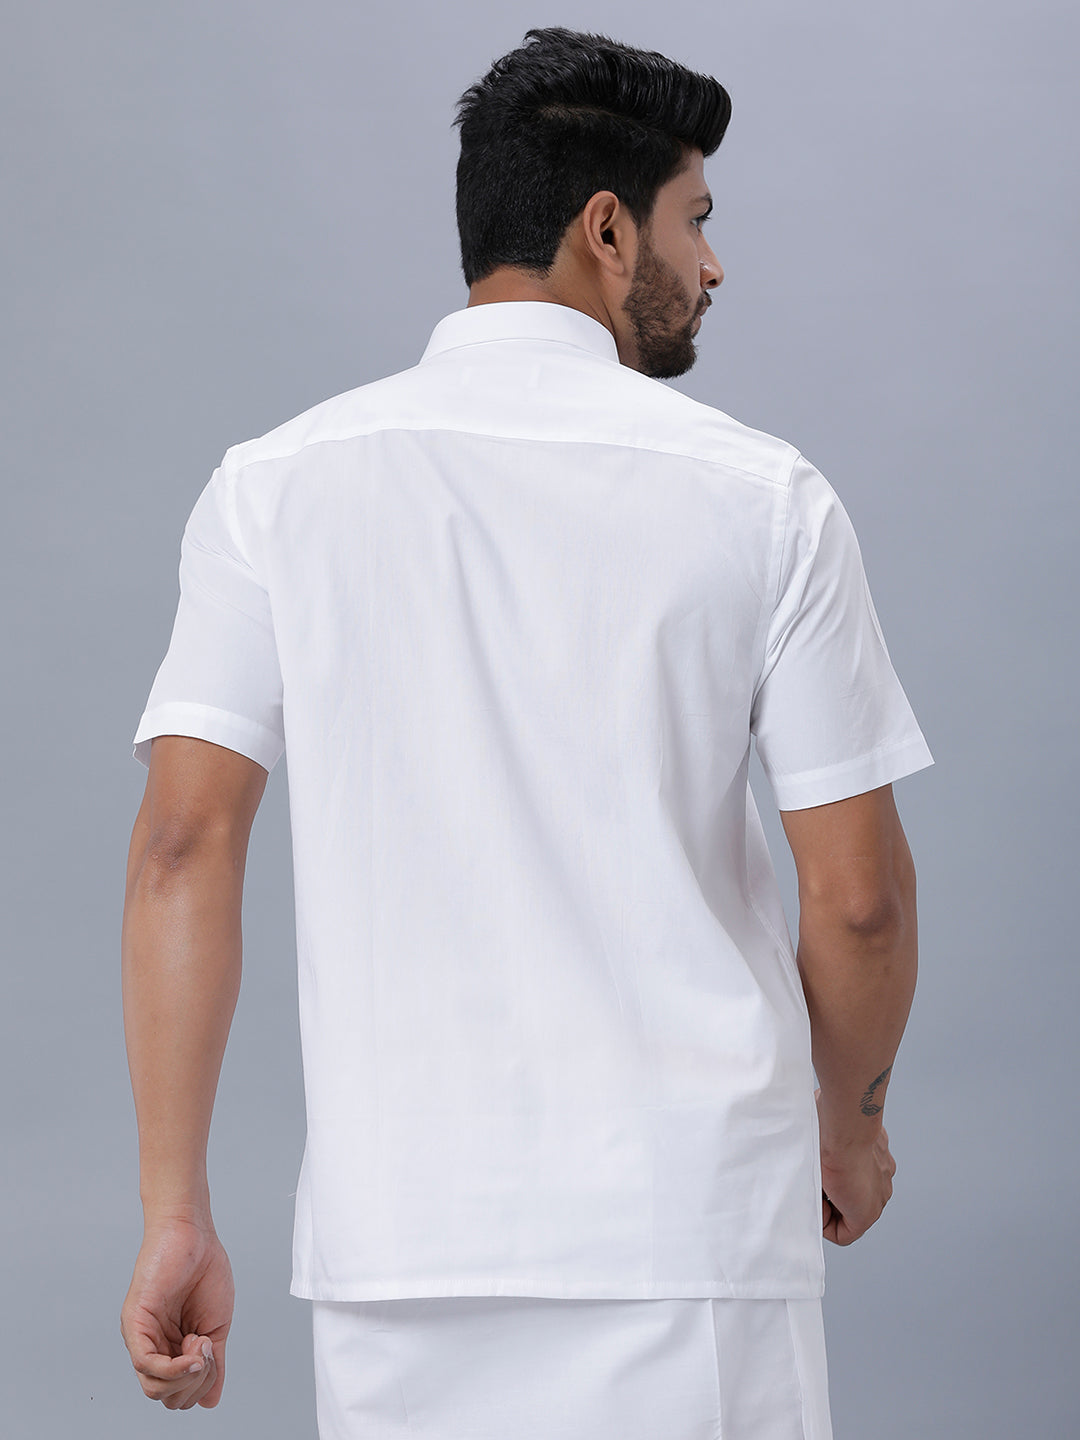 Mens Premium Pure Cotton White Shirt Half Sleeves Ultimate R5-Back view